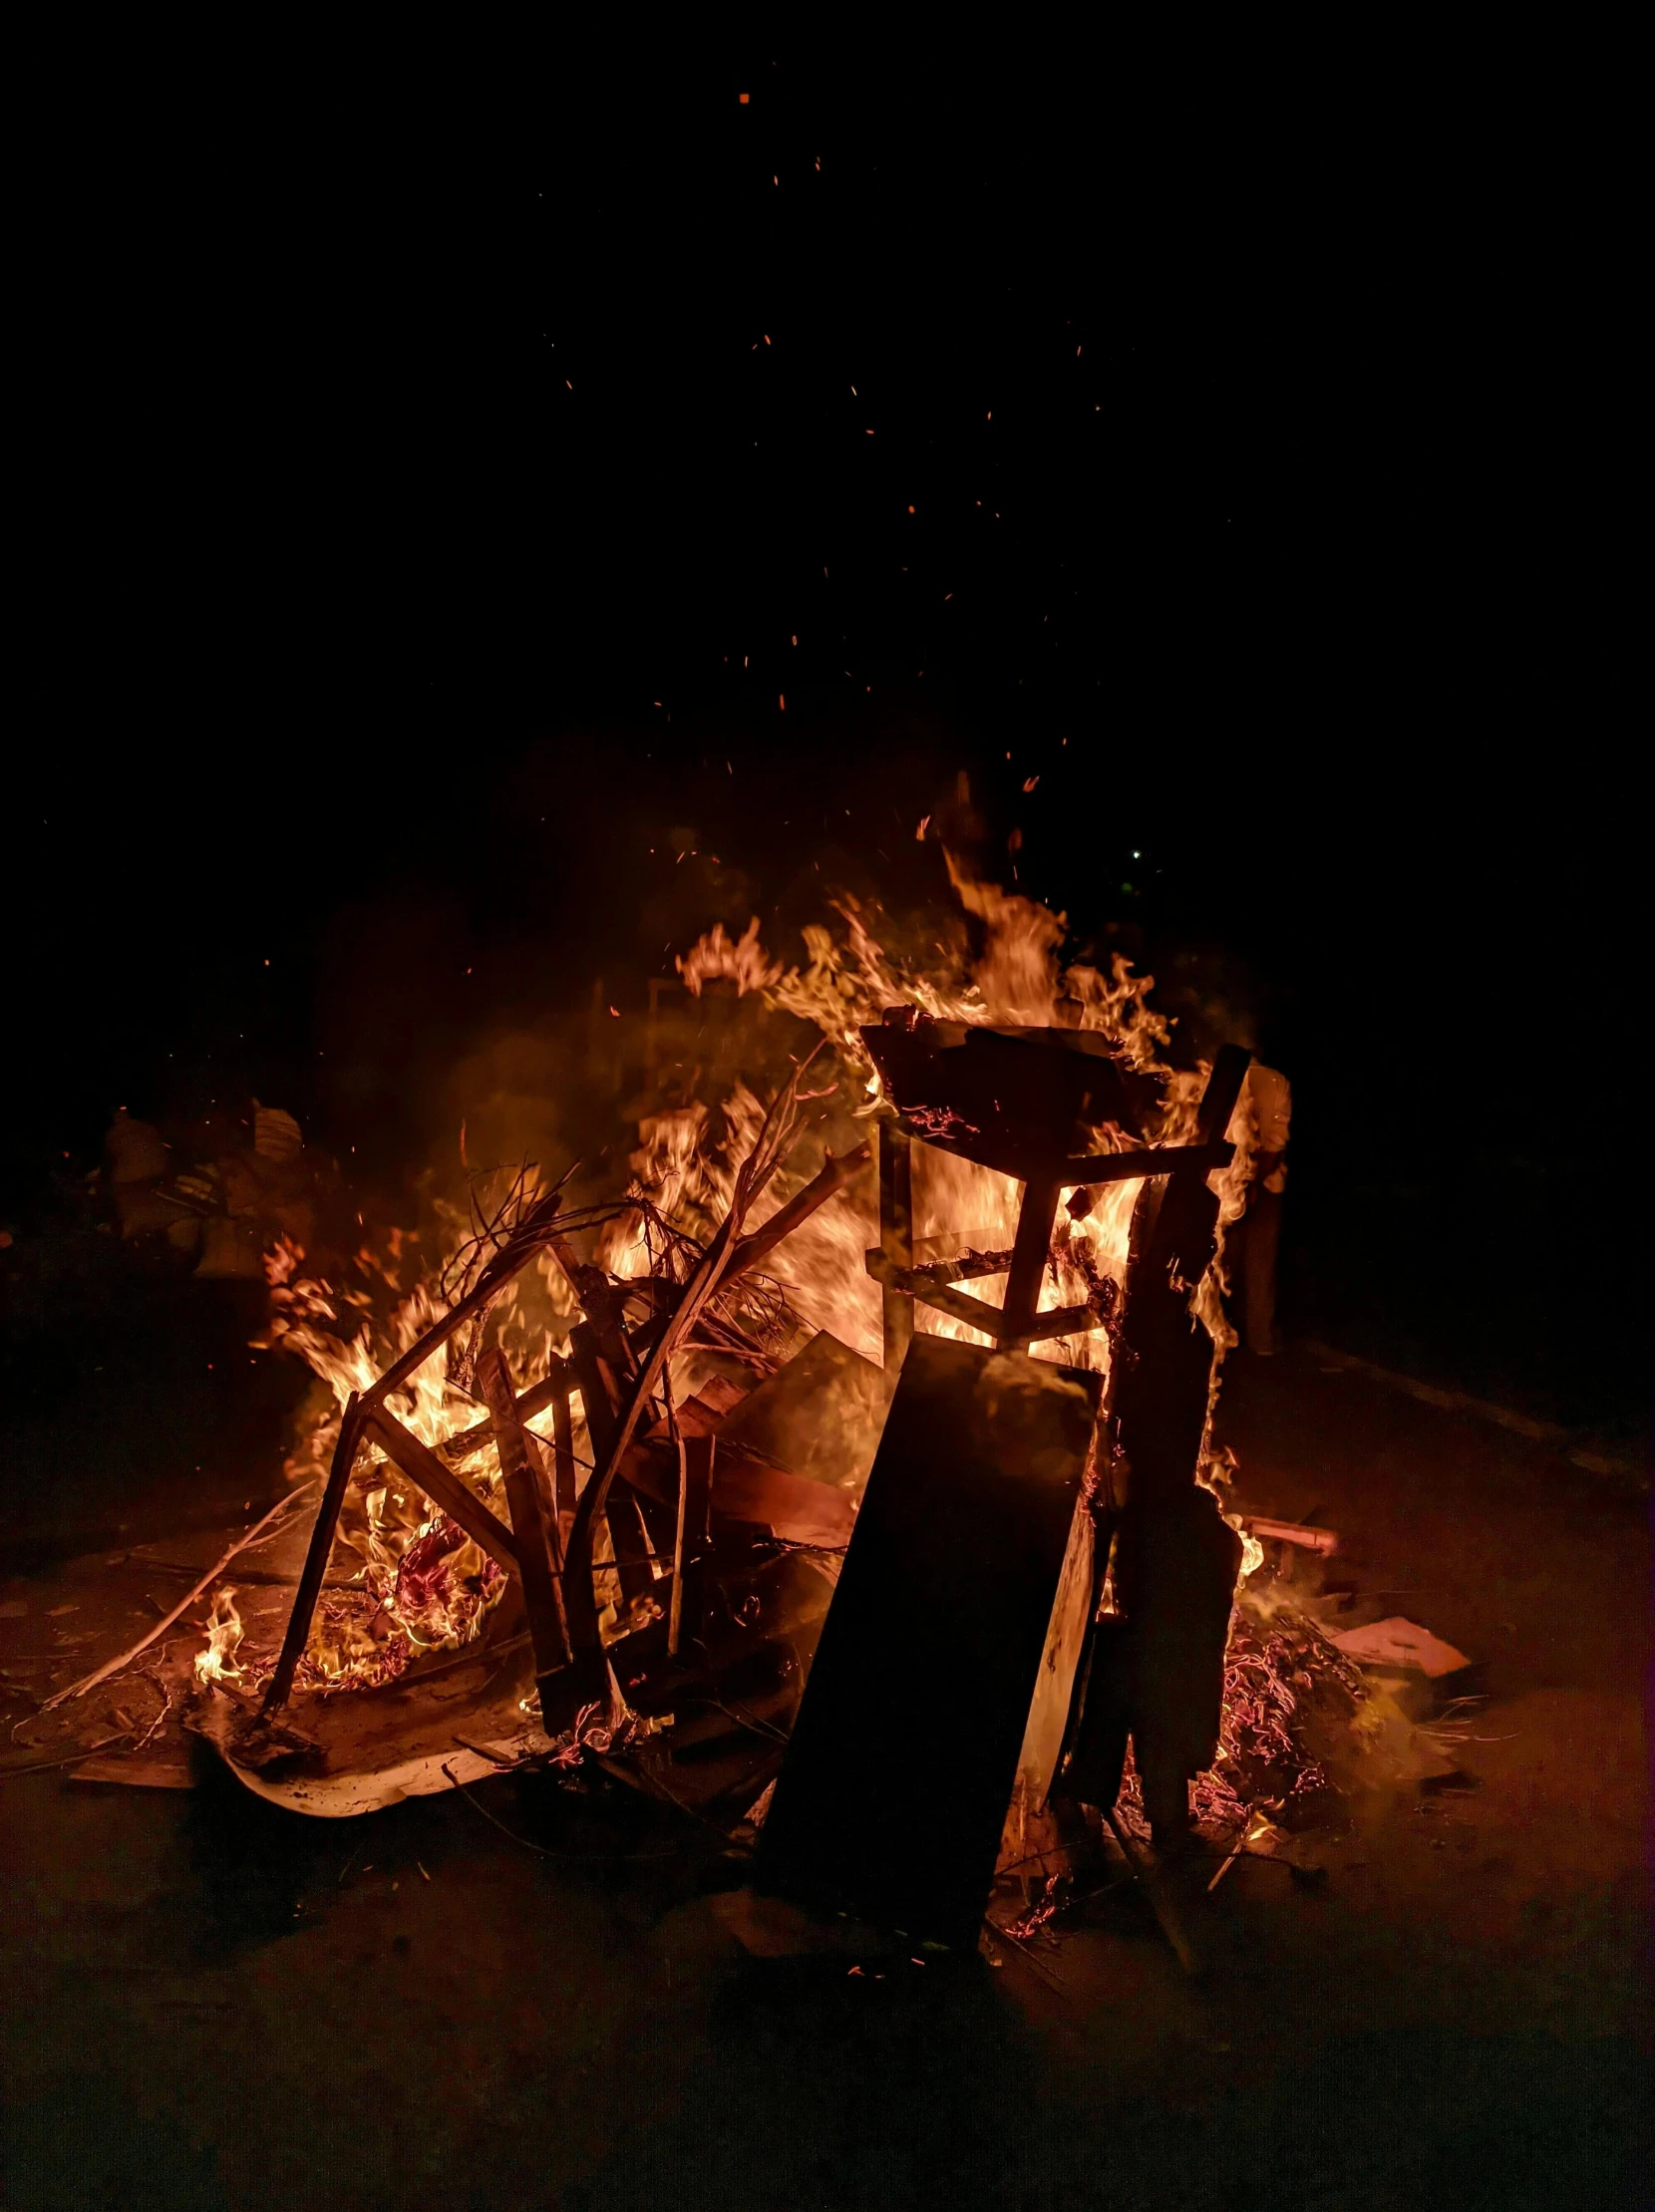 a group of people standing around a bonfire, by Niko Henrichon, conceptual art, riot shields, photograph taken in 2 0 2 0, in junkyard at night, on a black background